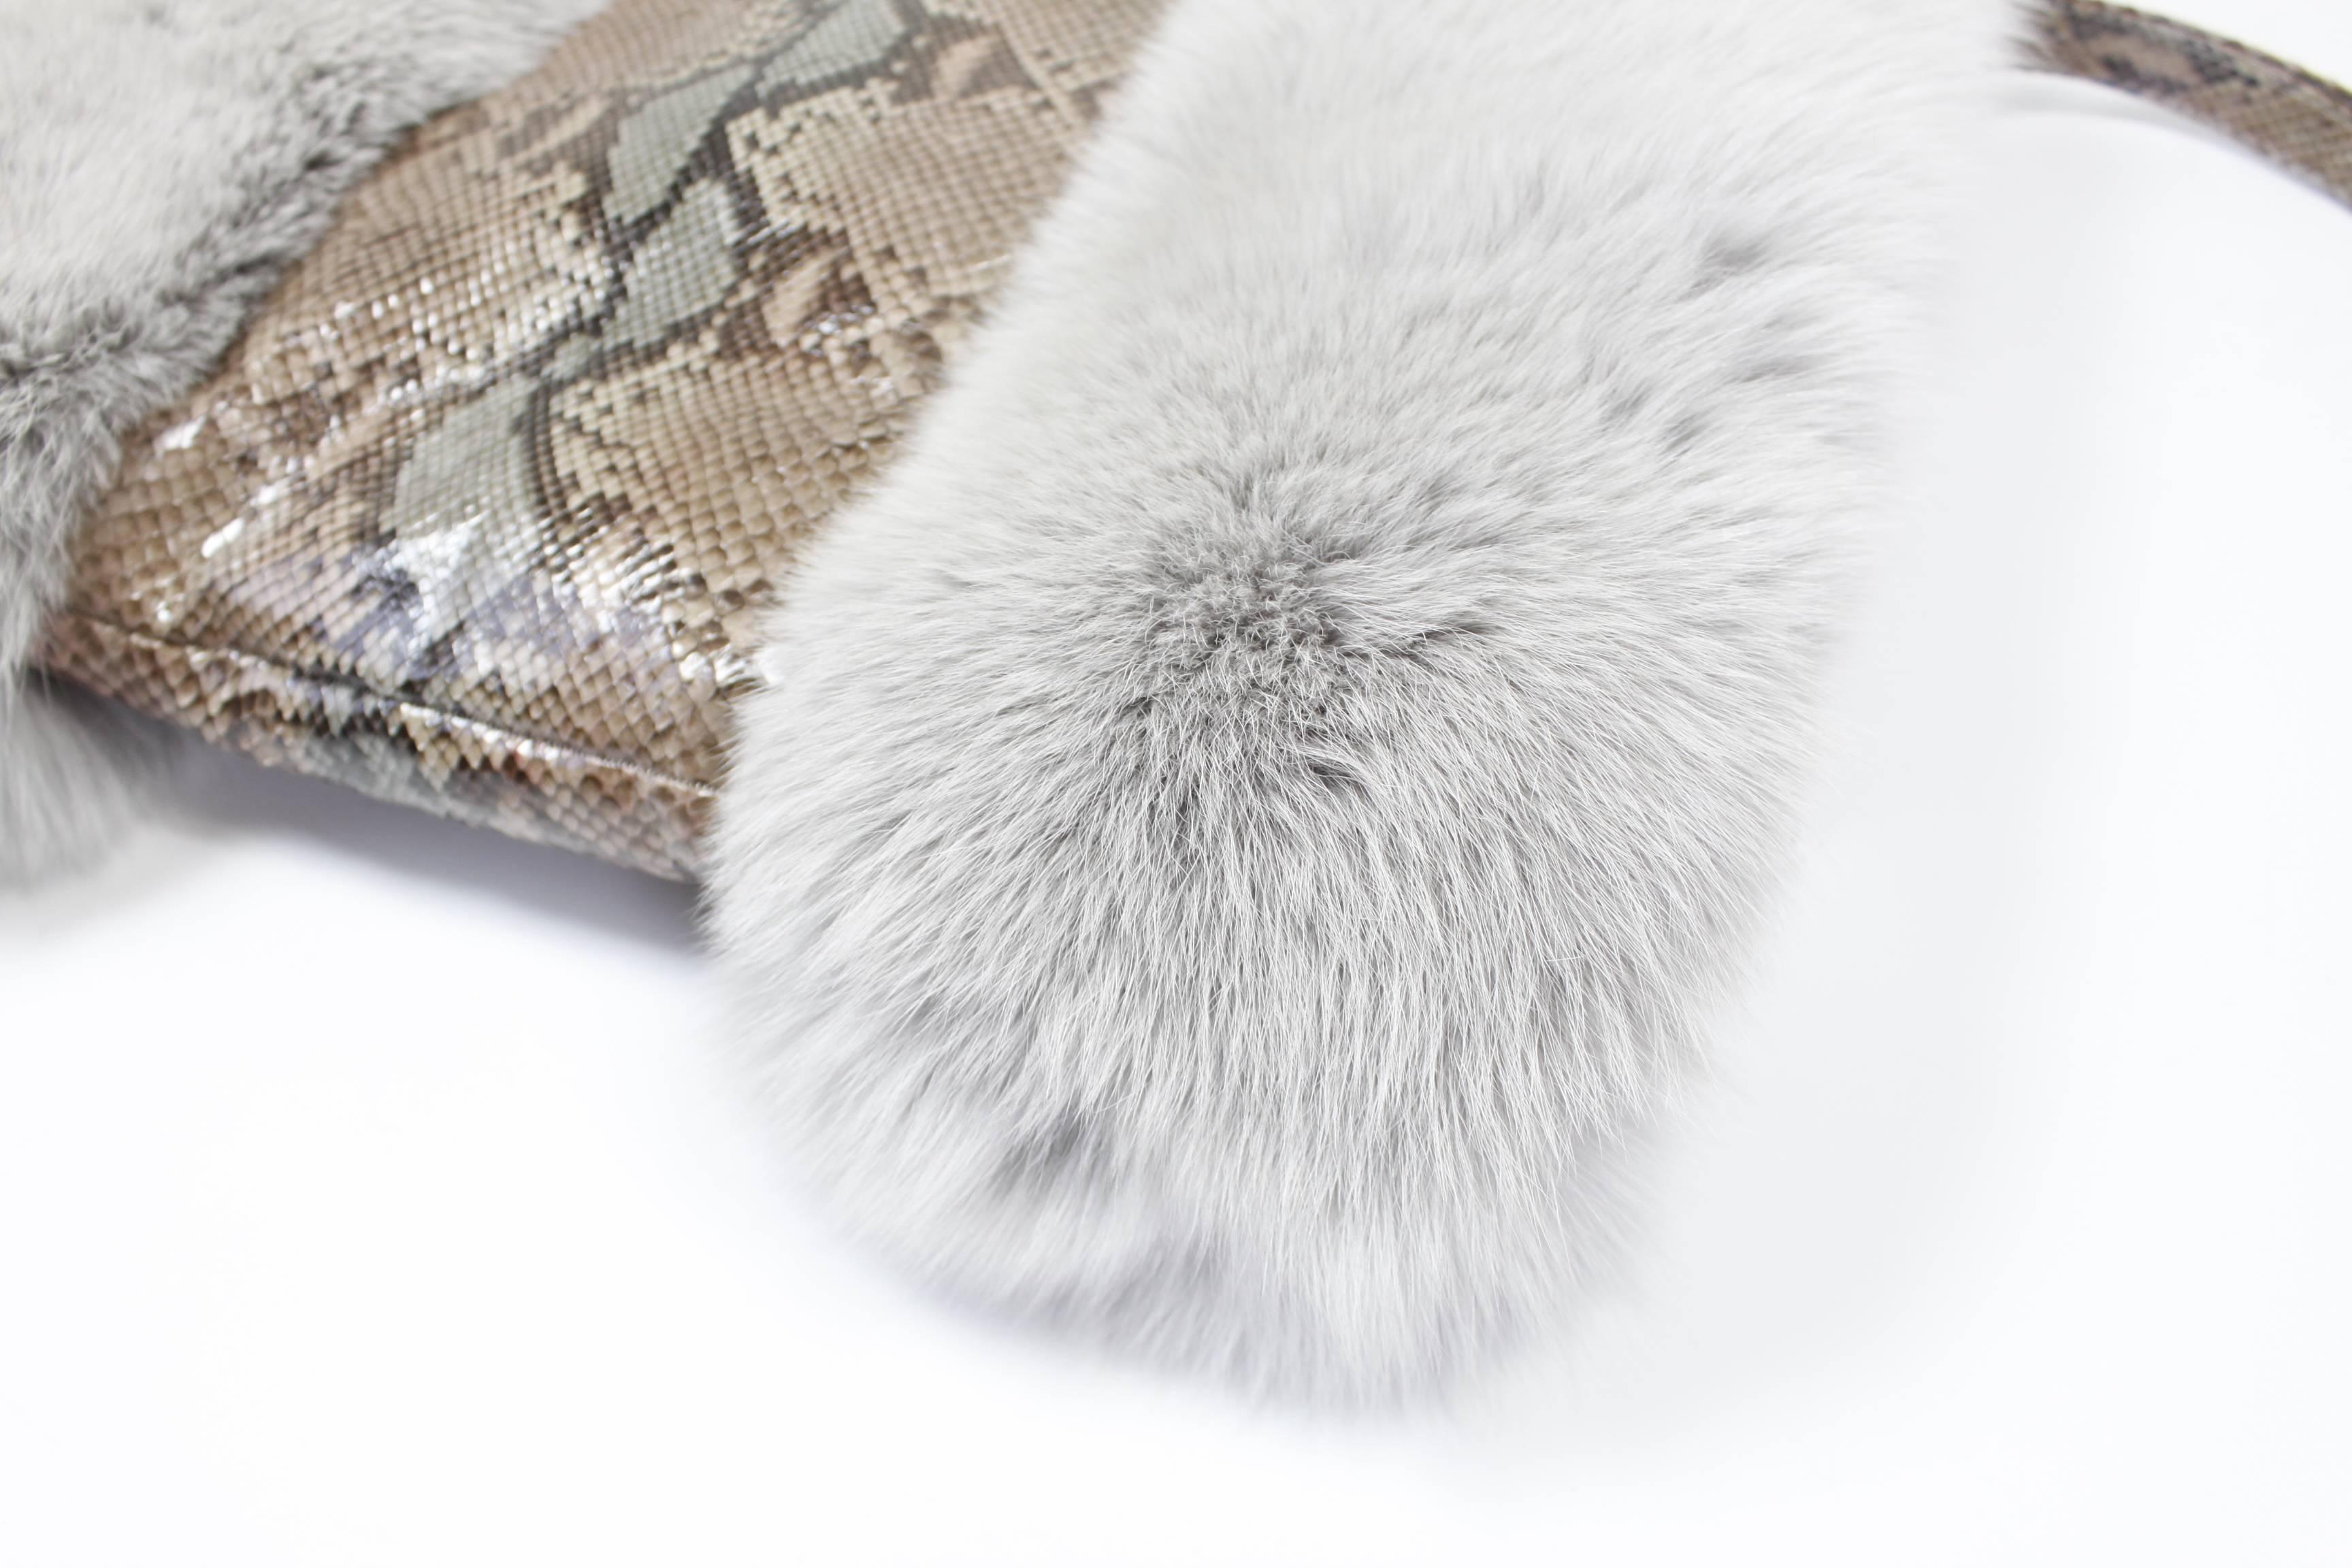 Vintage Pastel Snakeskin and Grey Fox Fur Muff. Lined in silk. Zip pocket inside.

Measurements--
17.5 x 13 inches